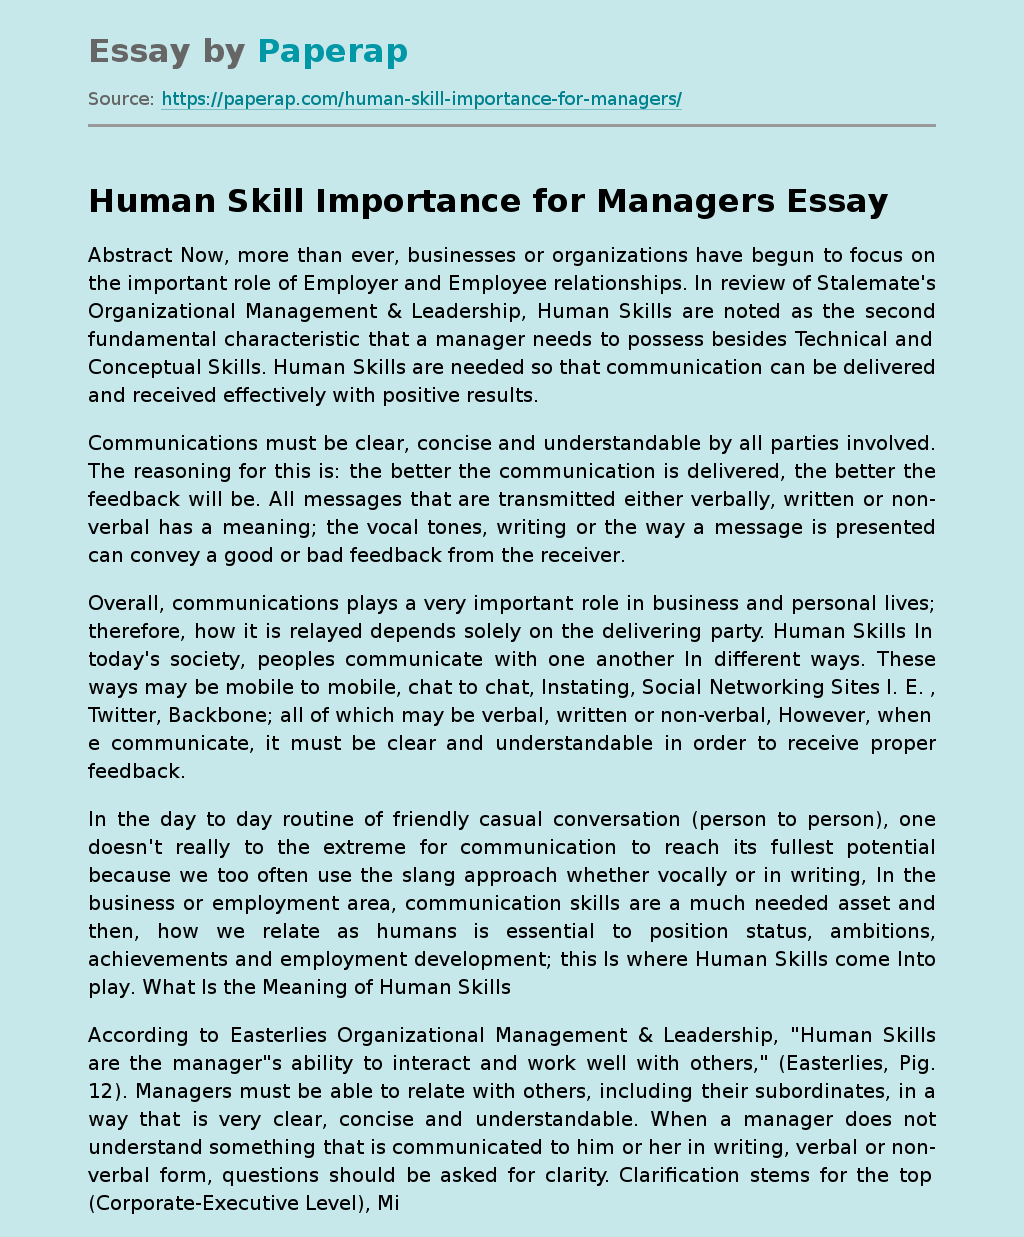 Human Skill Importance for Managers